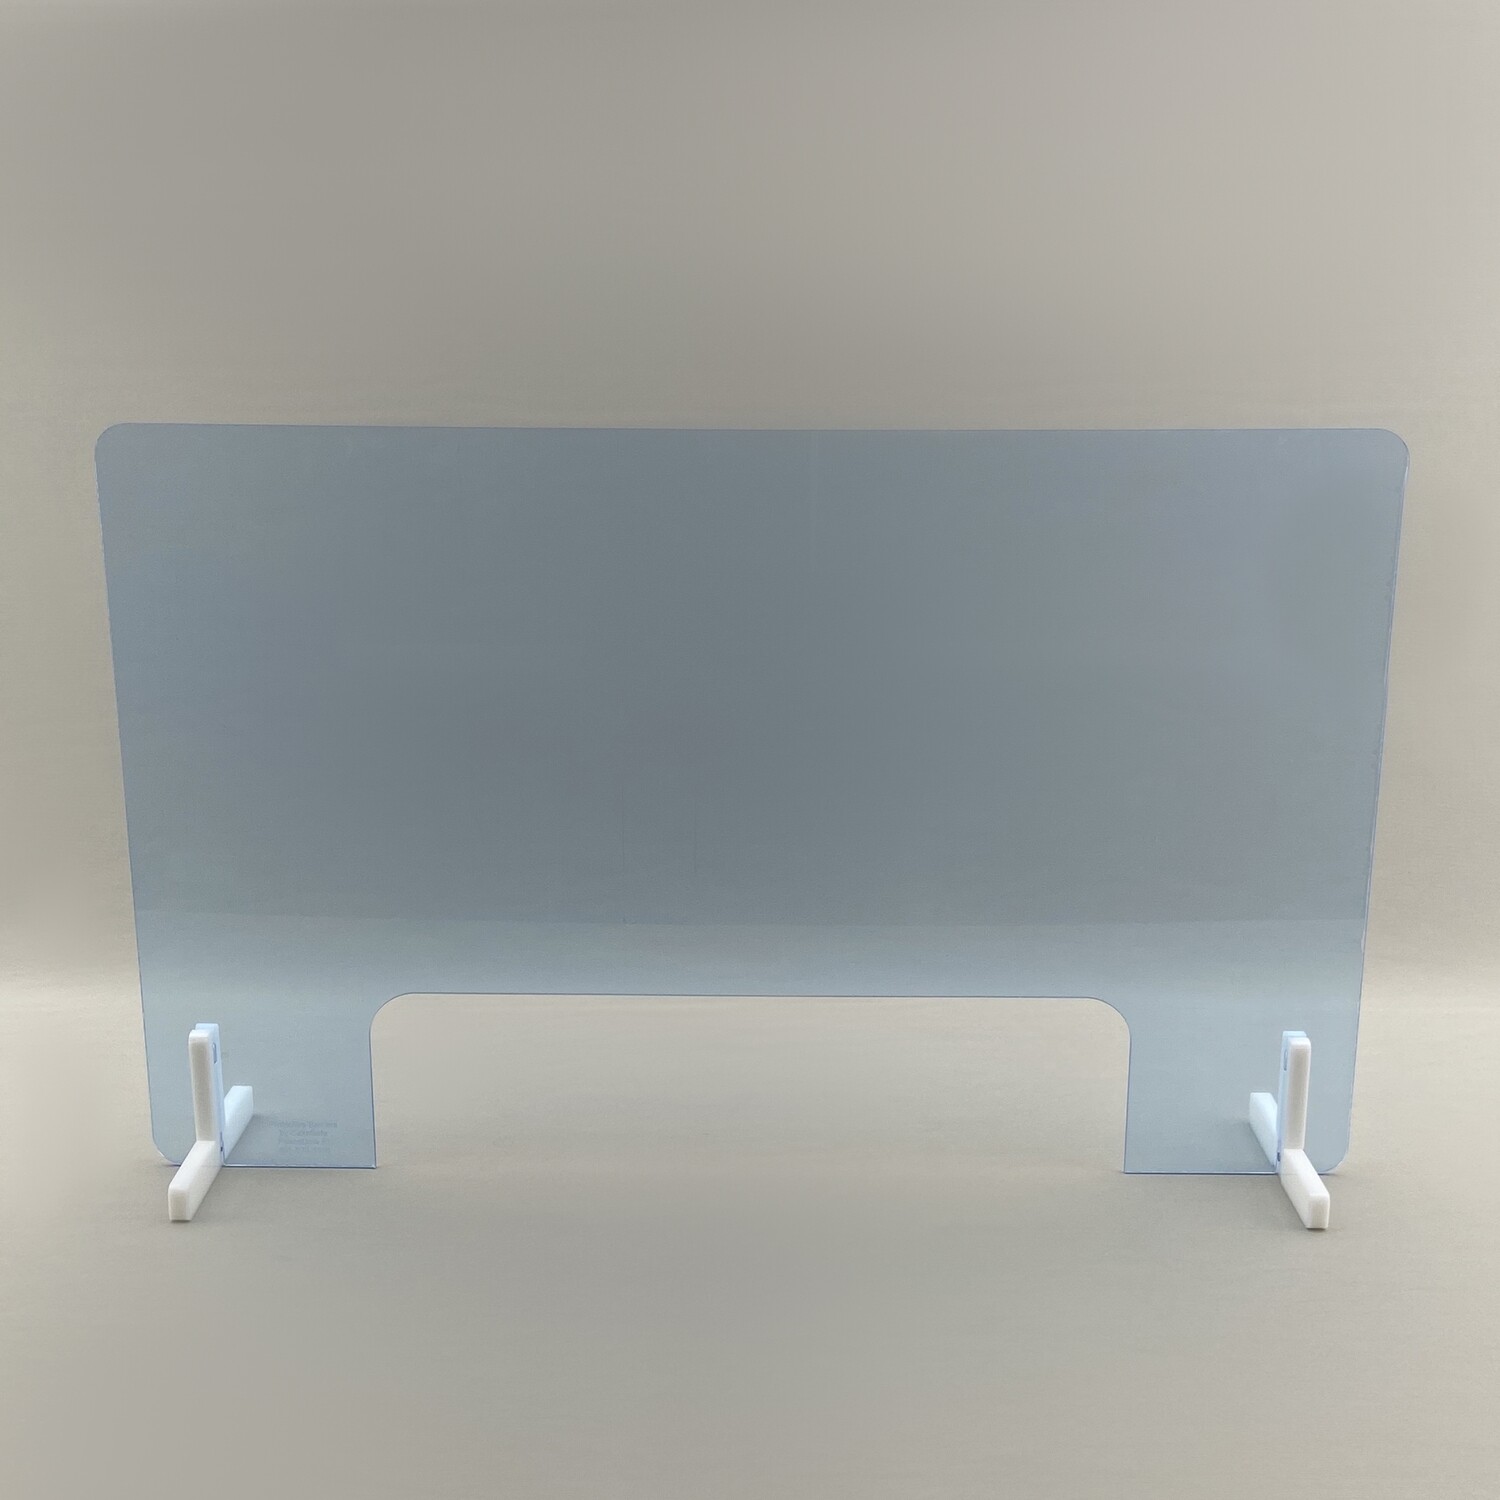 30 x 20 inch Free Standing Acrylic Barrier with 18" x 5" Cutout